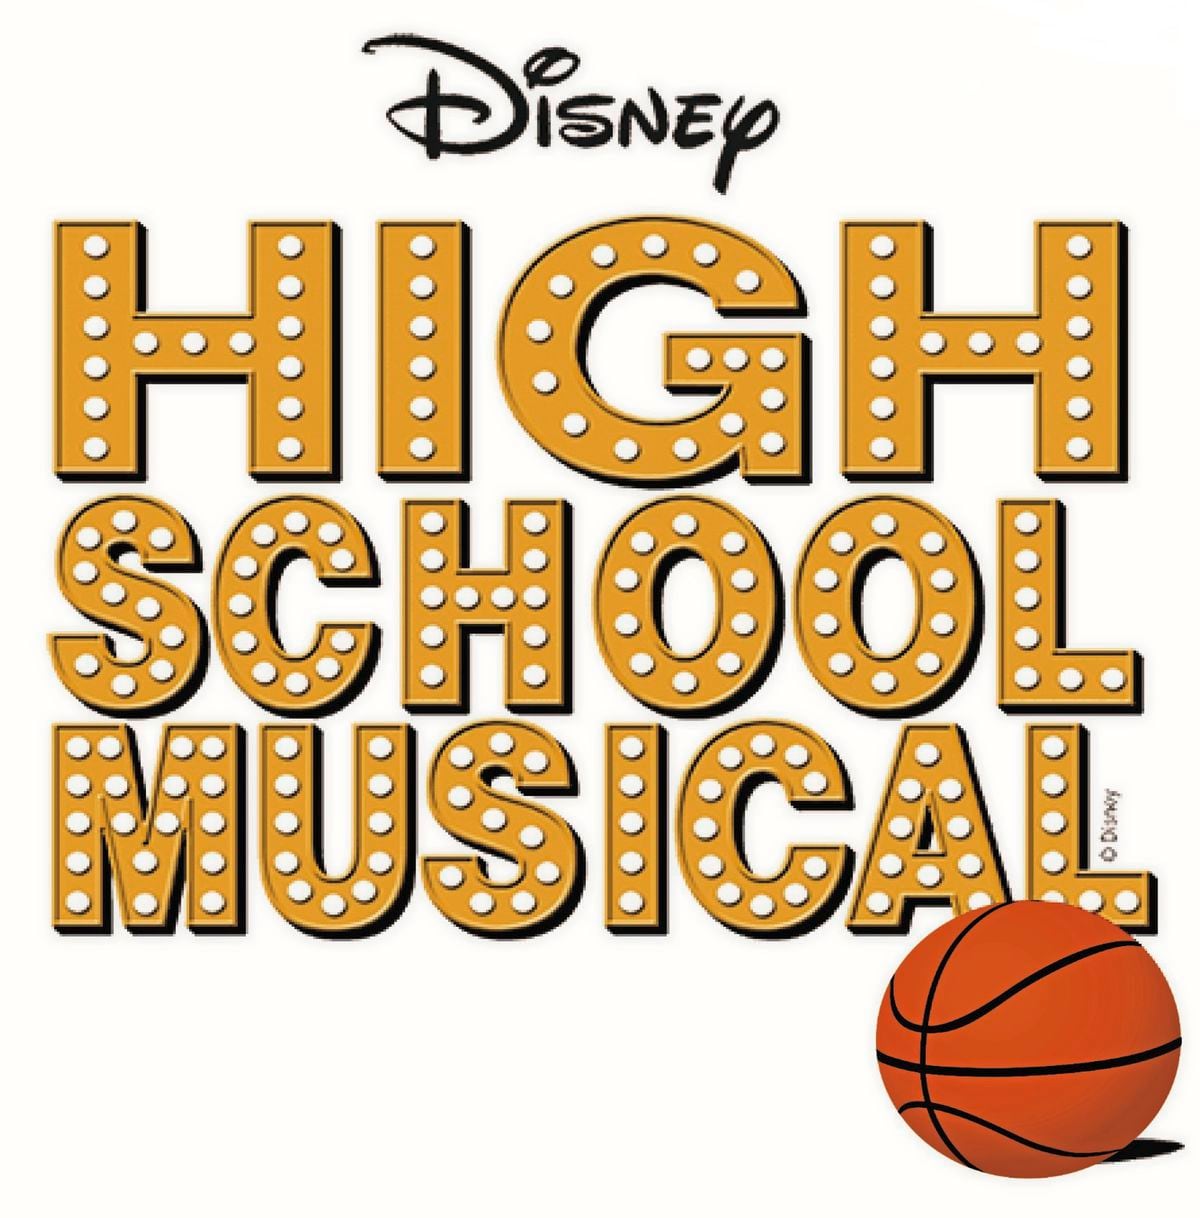 Elizabeth College is putting on High School Musical in January 2022 but are having a casting call for female leads across the island. (29520516)